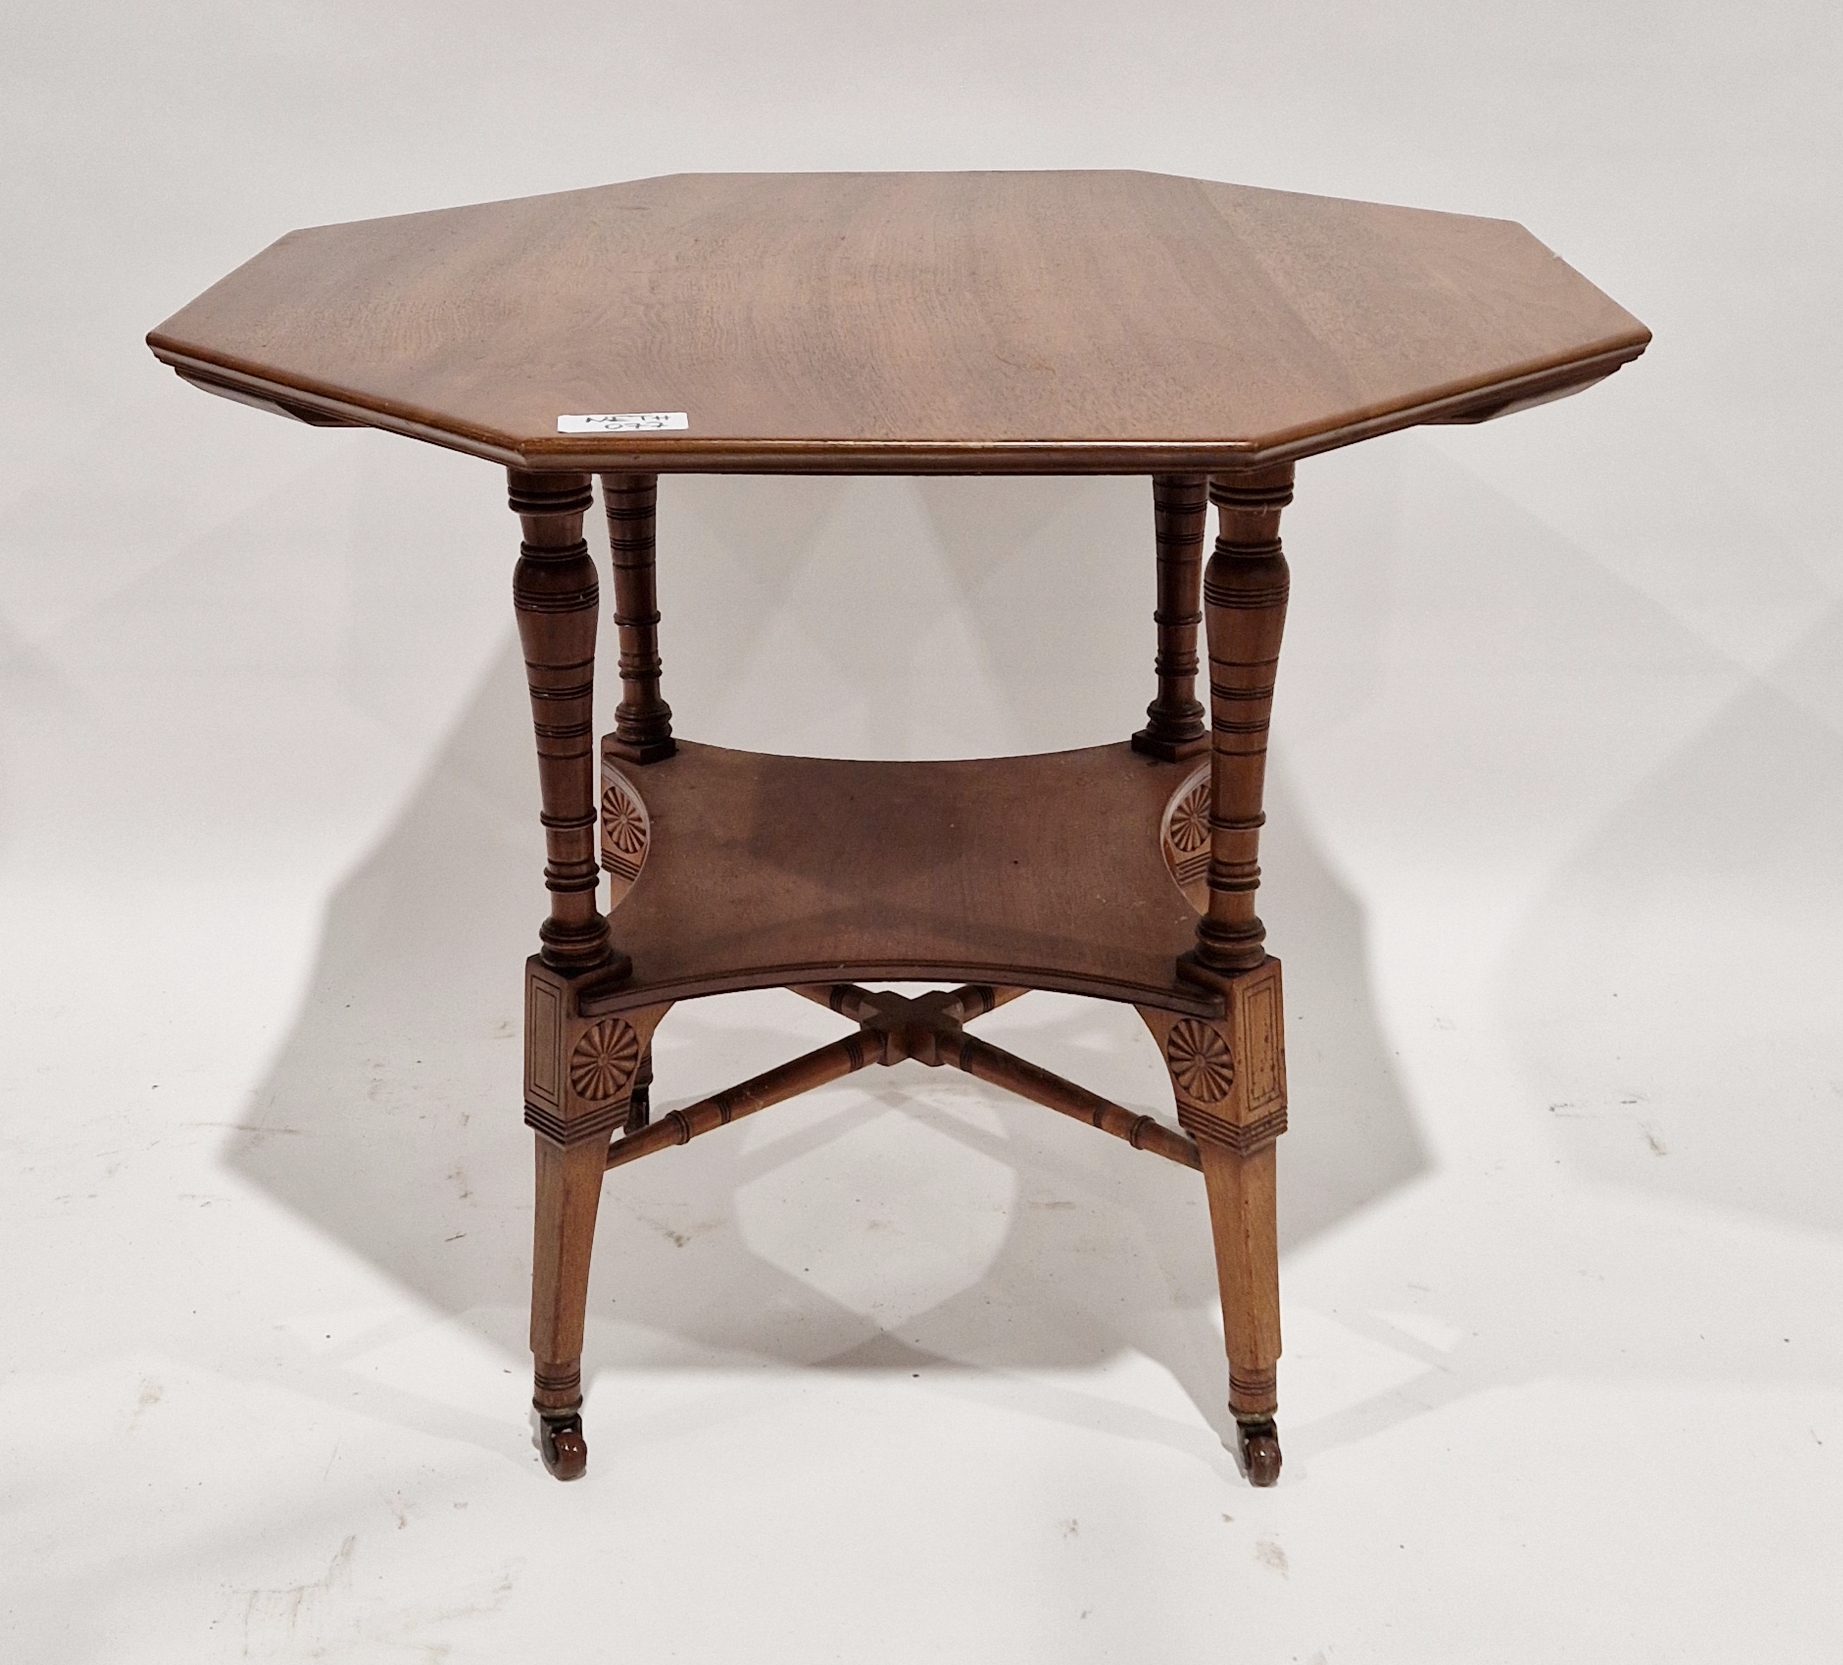 19th century mahogany octagonal occasional table in Aesthetic-Movement taste, on turned supports